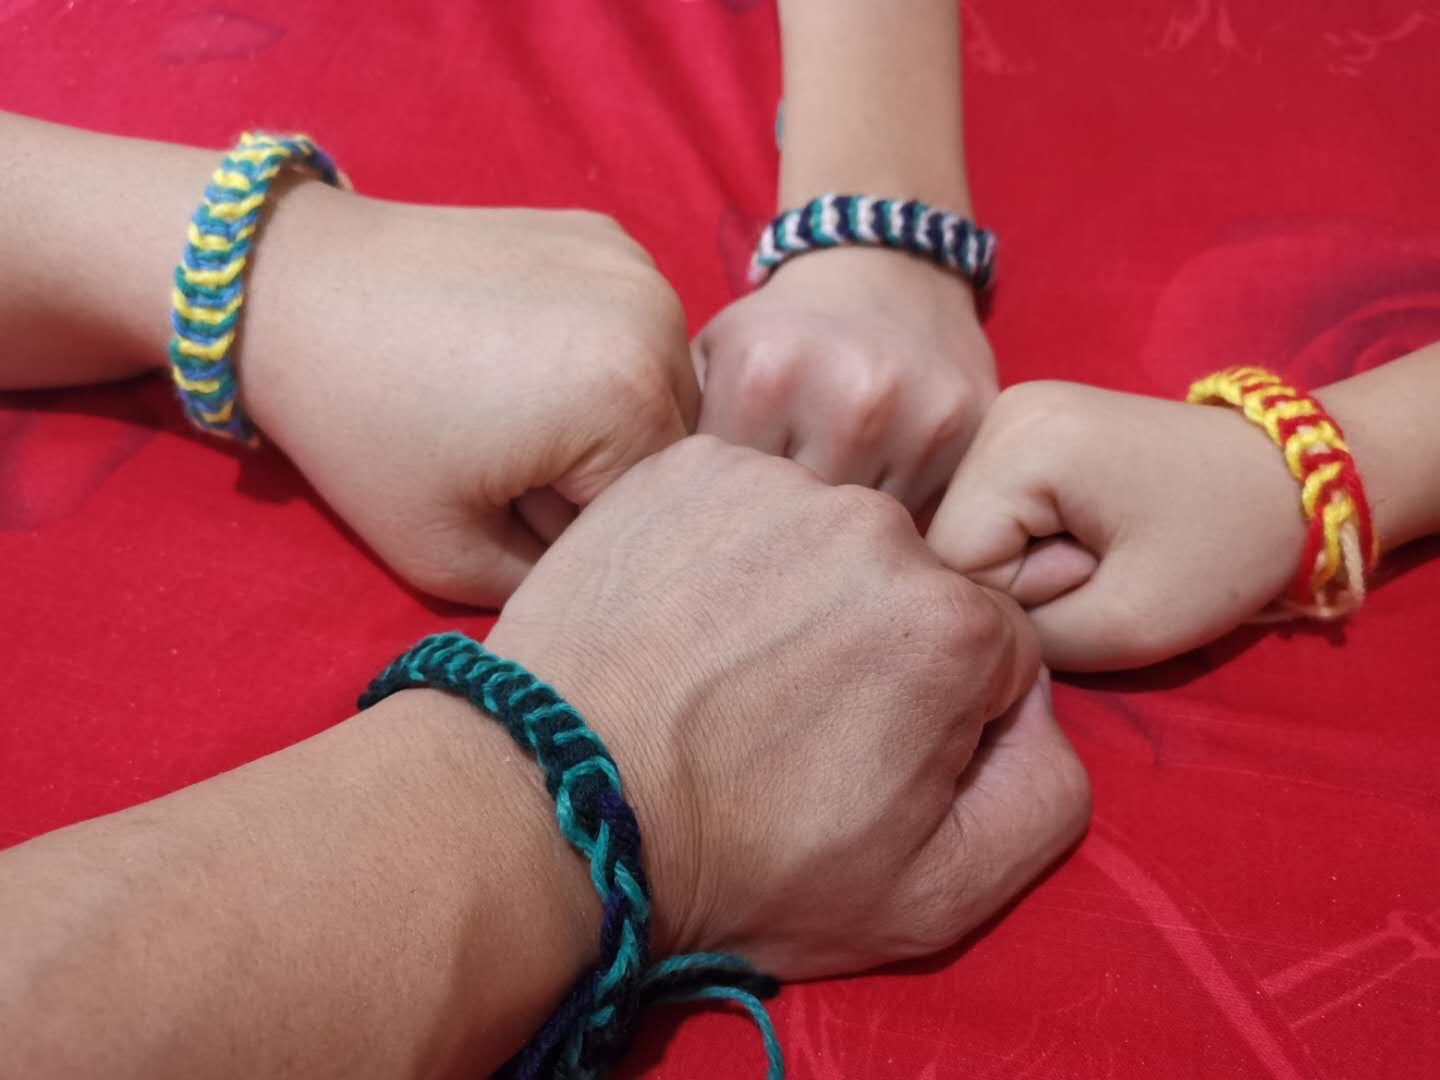 Four arms fist bump to show off their bracelets on their wrists.